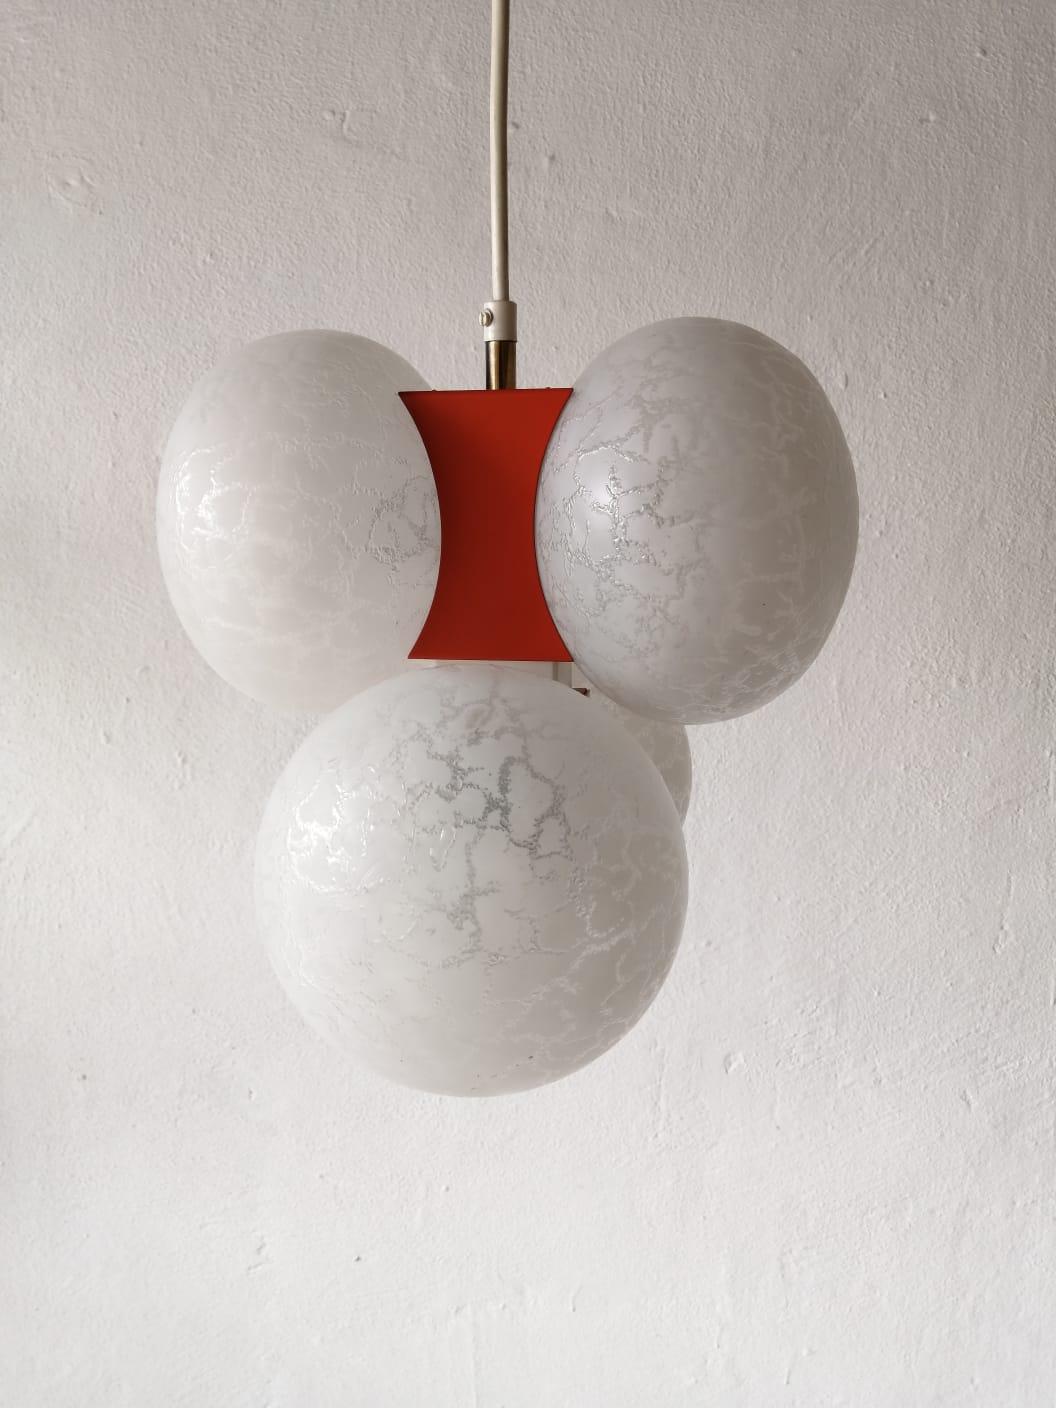 4 amorphous glass & orange metal chandelier by Moderne Leuchten, 1970s Germany

Very beautiful and rare design pendant lamp.

Lampshade is in very good vintage condition.

This lamp works with 4x E27 light bulbs.
Wired and suitable to use